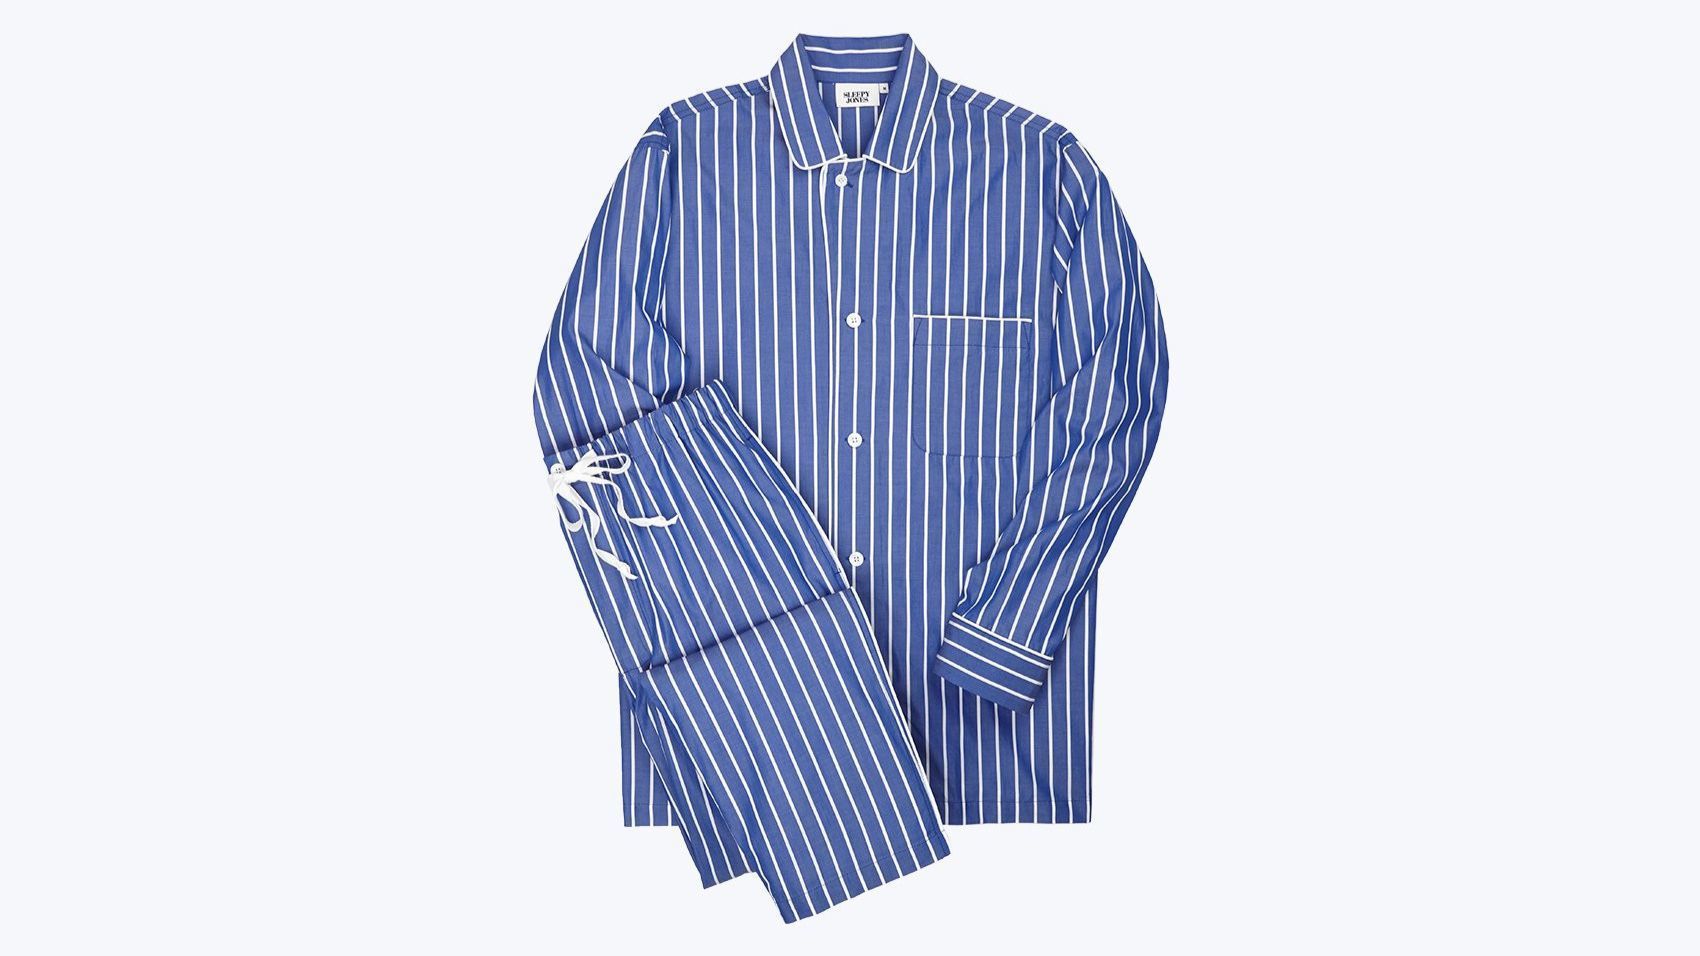 Lowell Pajama Set in blue-and-white stripes from Sleepy Jones.